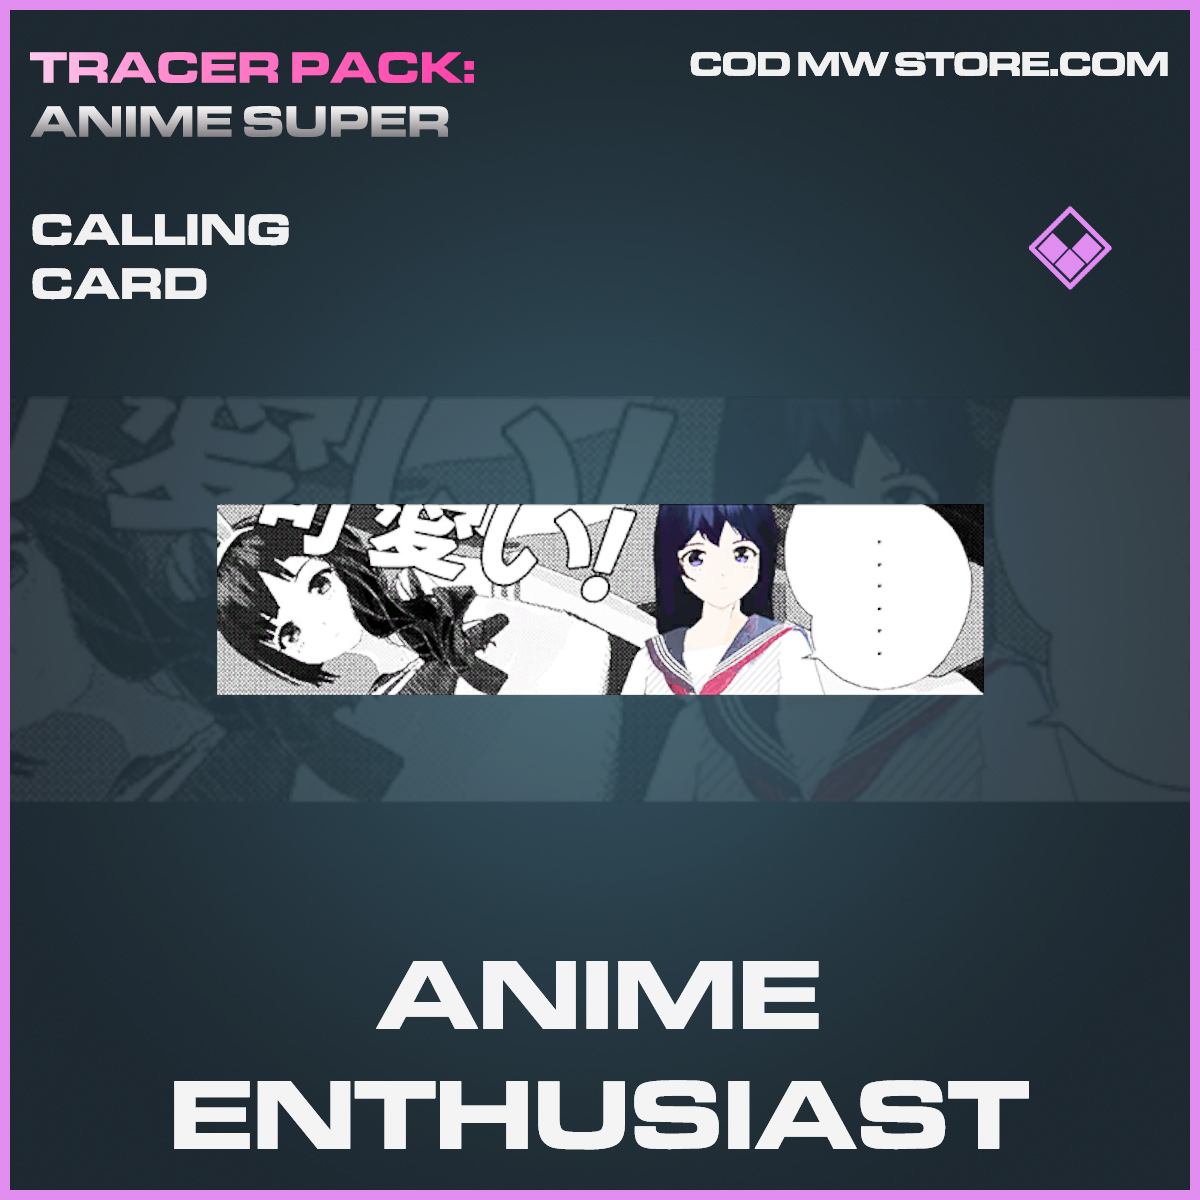 Tracer Pack Anime Super Blueprints Item Store Bundle Call Of Duty Black Ops Cold War Warzone Lol (modern warfare anime super tracer pack) subscribe to the channel for more call of duty modern. tracer pack anime super blueprints